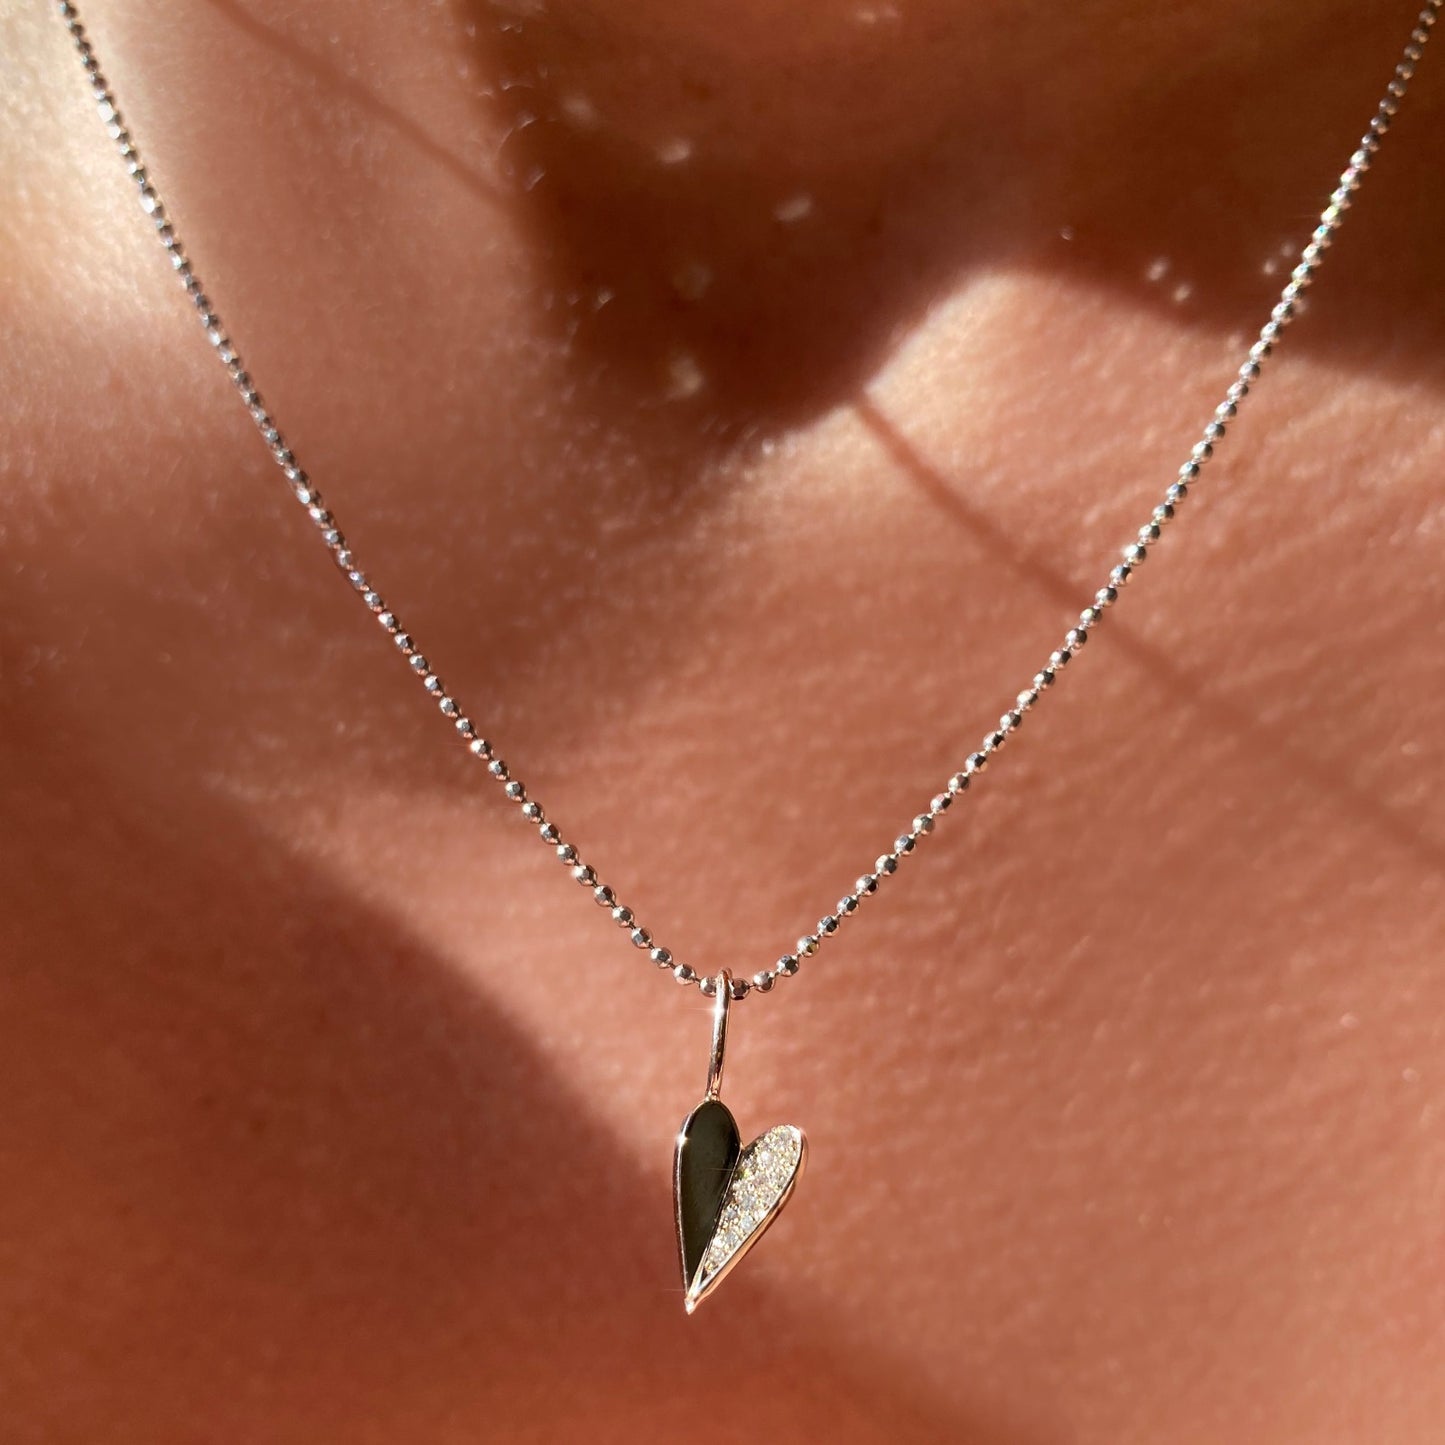 14k white gold small folded heart charm with pave diamonds on the right side. Styled on a neck hanging from a diamond cut bead chain necklace.